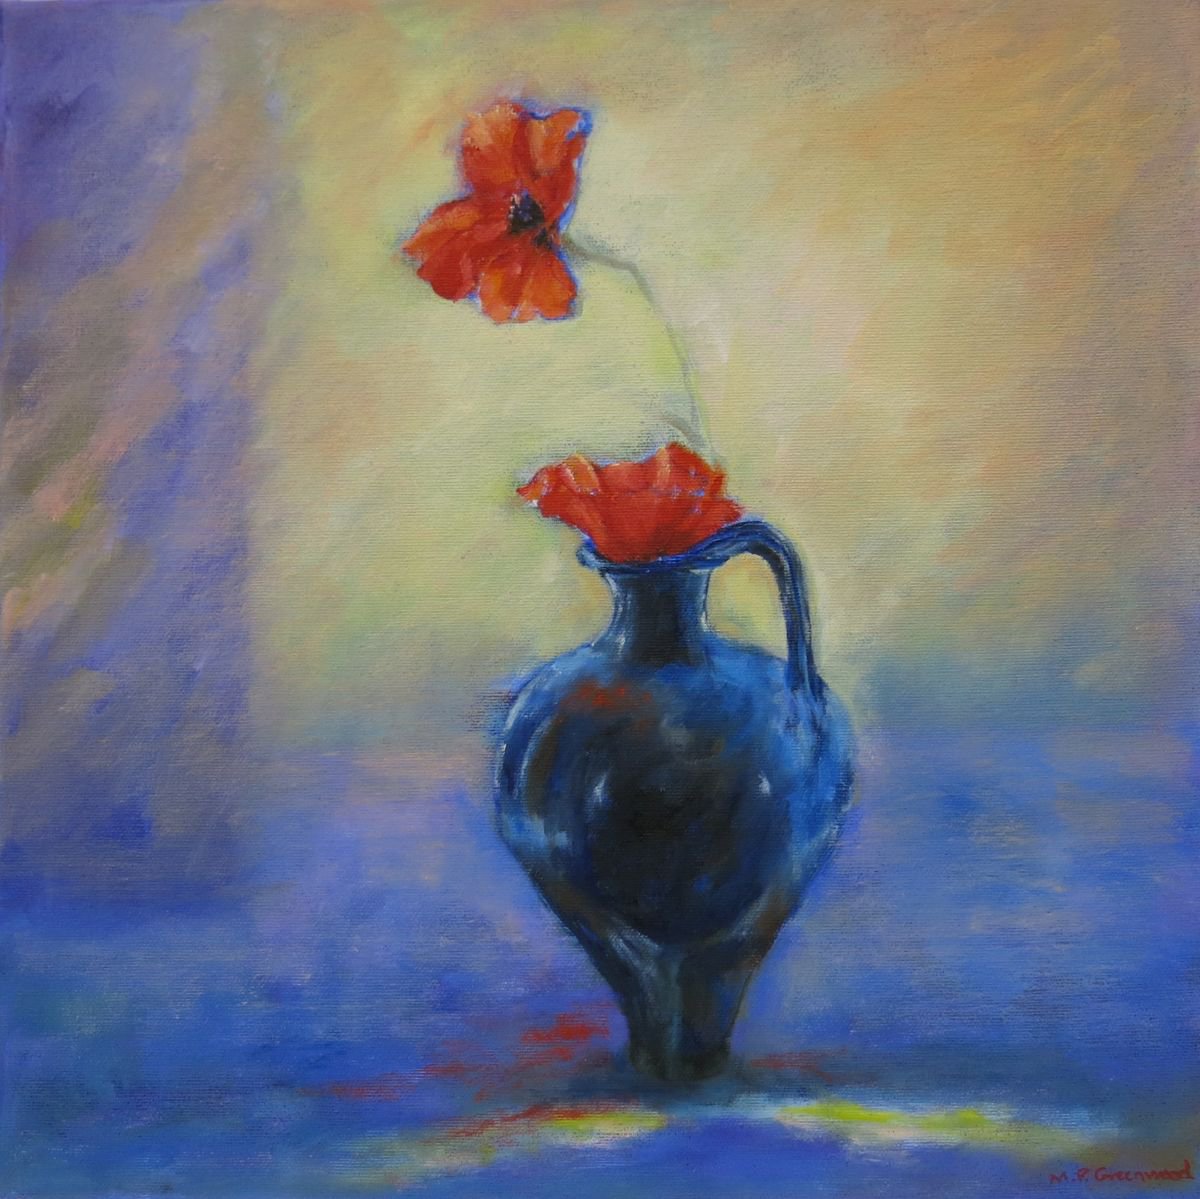 Blue Jug and Poppies by Maureen Greenwood